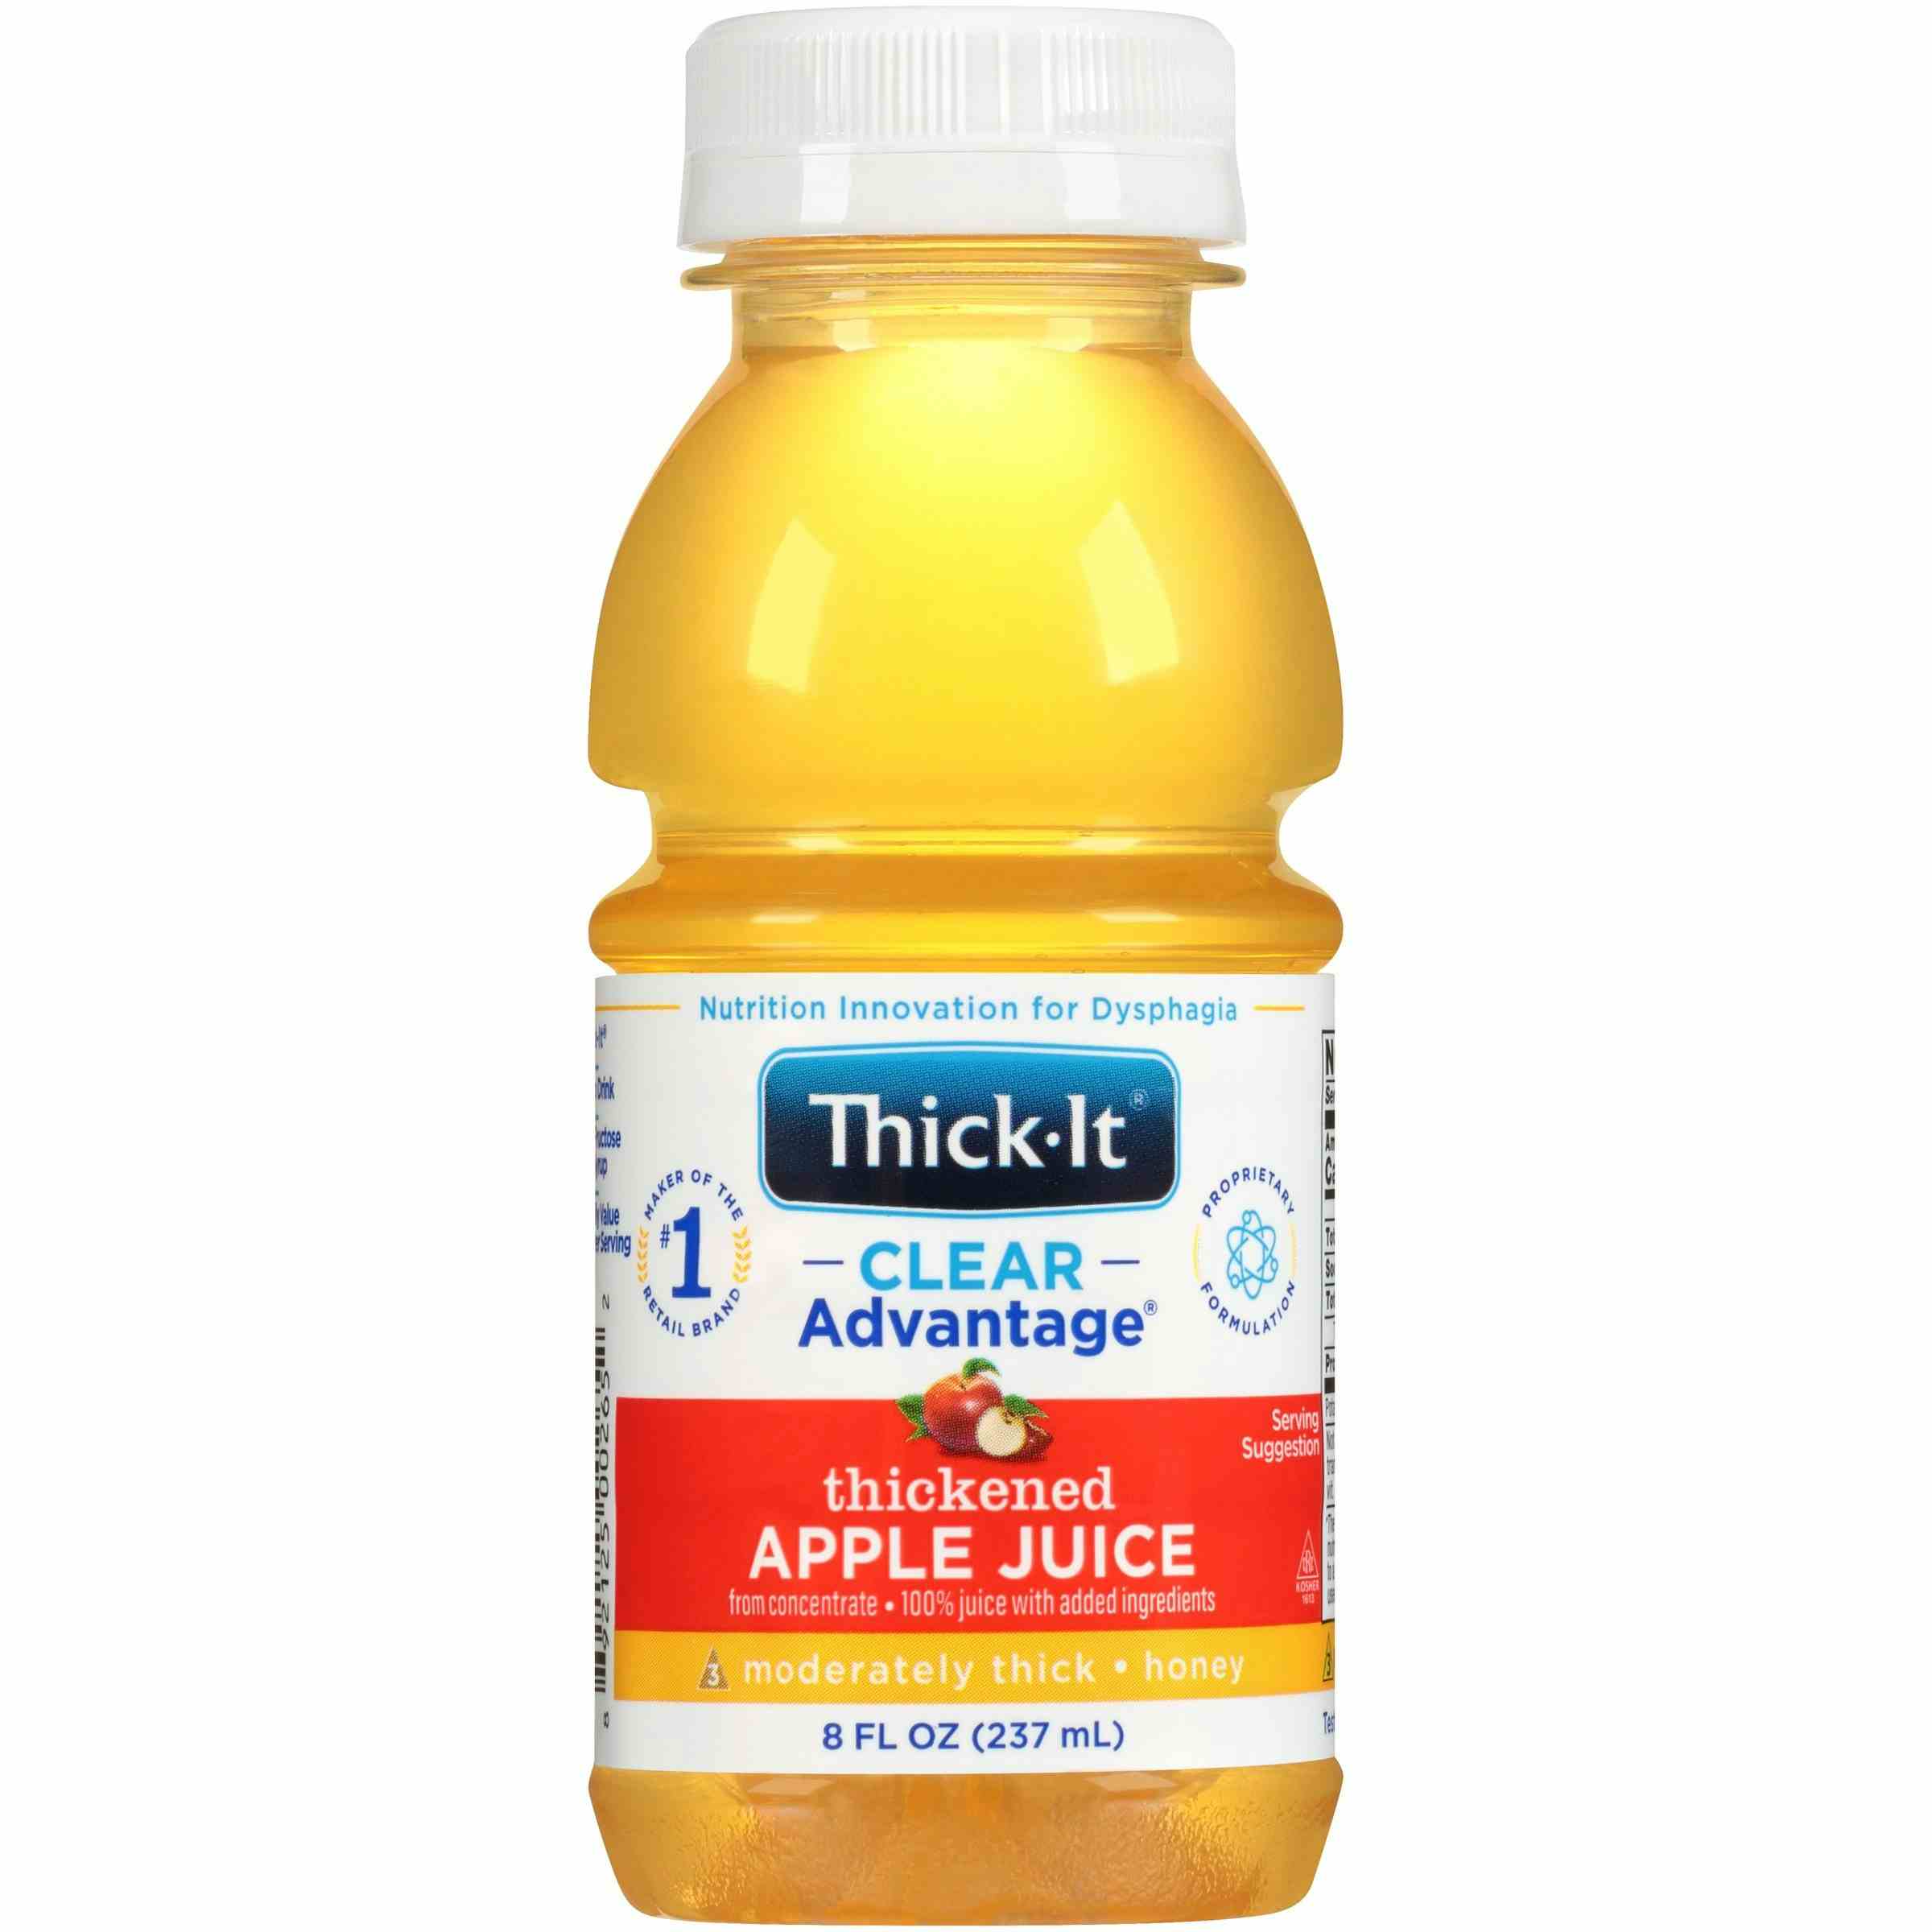 Thick-It Clear Advantage Thickened Apple Juice, Honey Consistency, Moderately Thick, 8 oz., B457-L9044, Case of 24